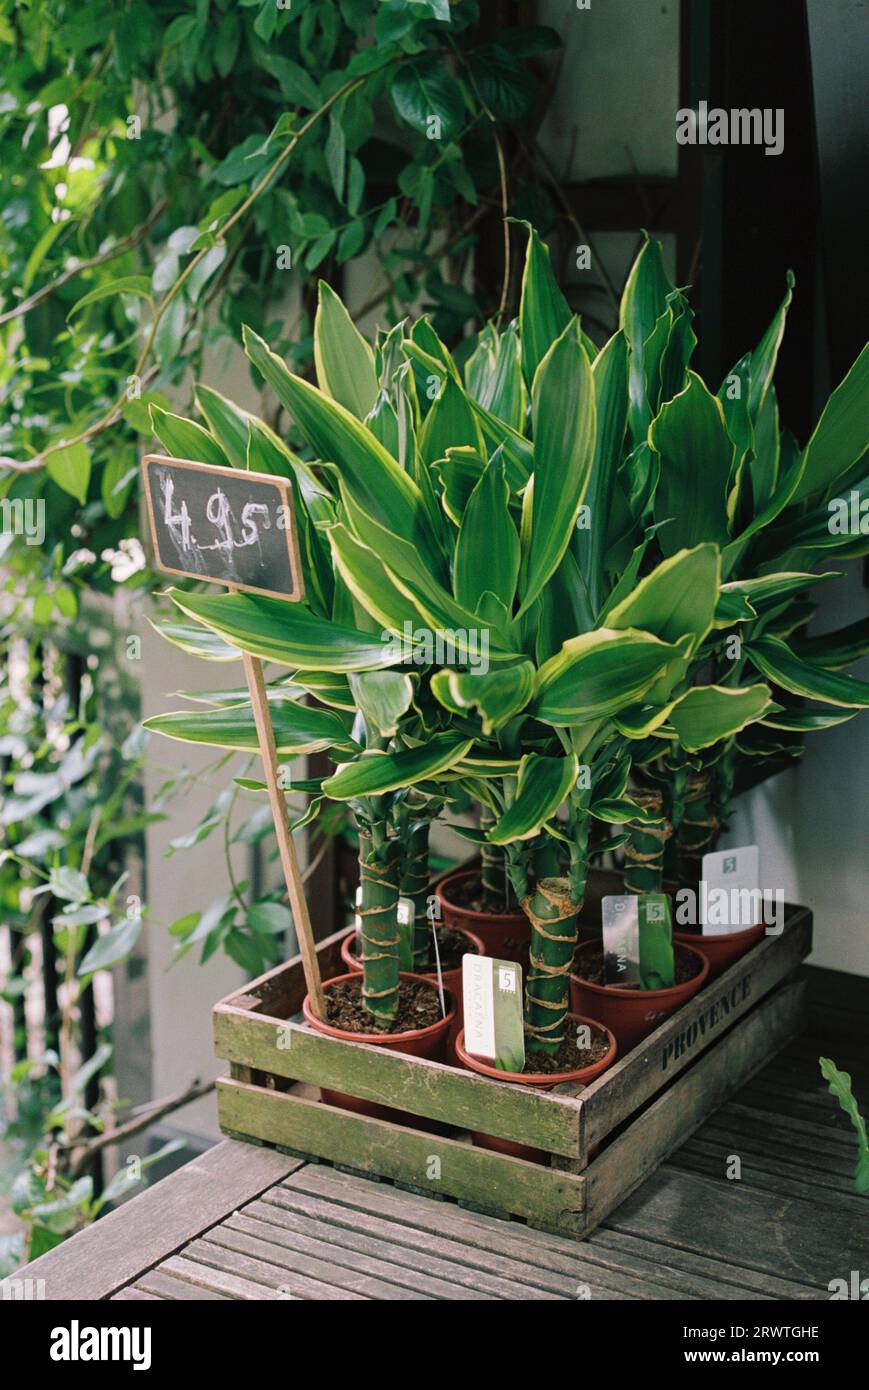 Corn Plant (Dracaena fragrans) plants in flower pots for sell on a wooden table Stock Photo